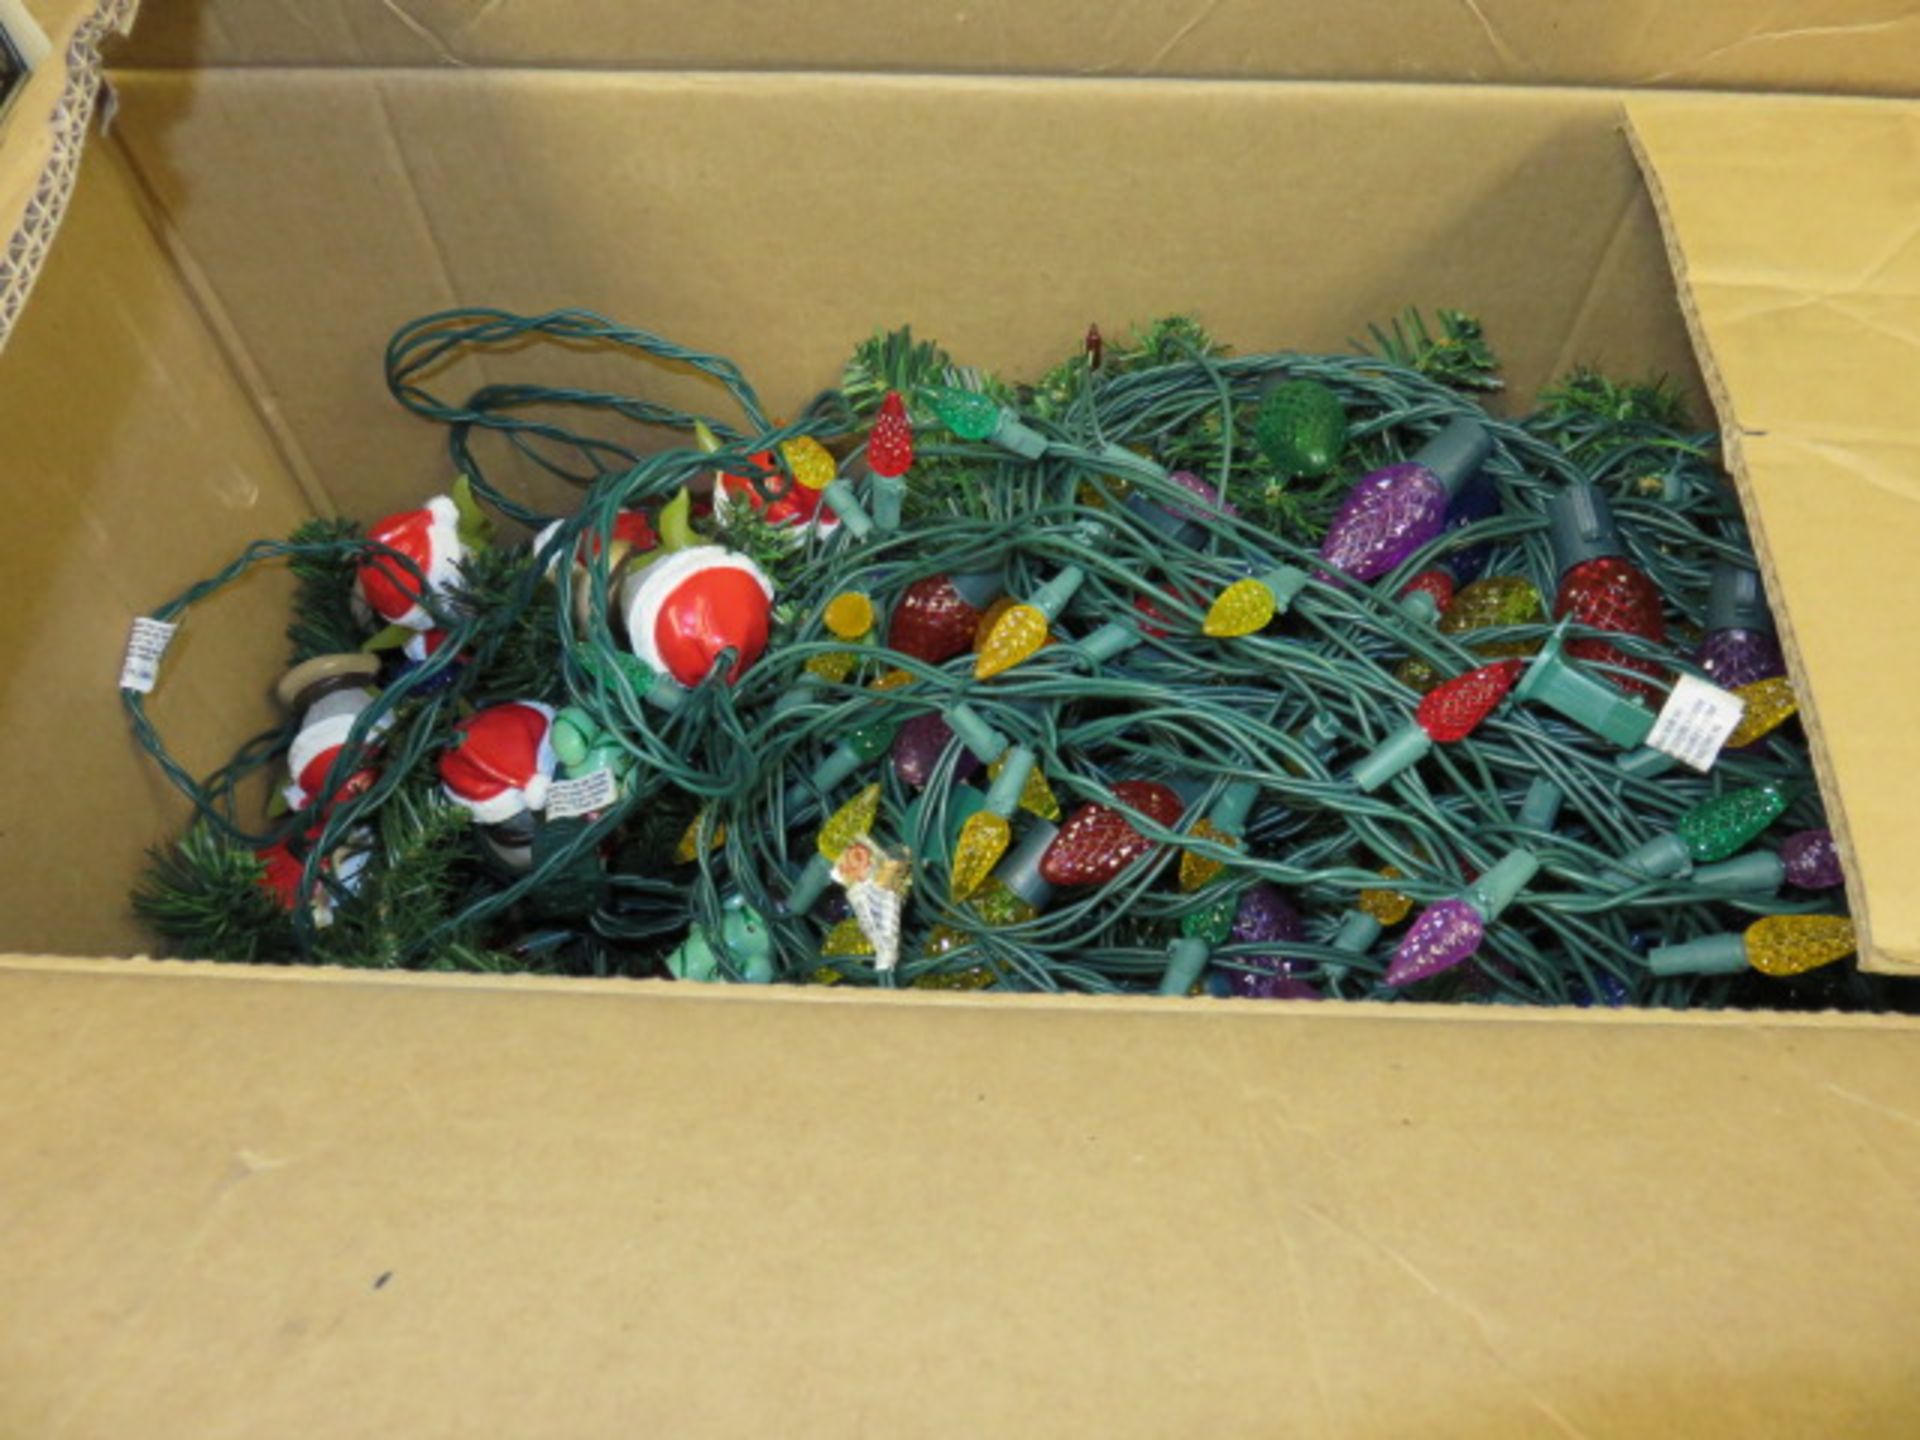 ASSORTED OFFICE AND PACKING SUPPLIES AND CHRISTMAS LIGHTS - Image 4 of 6